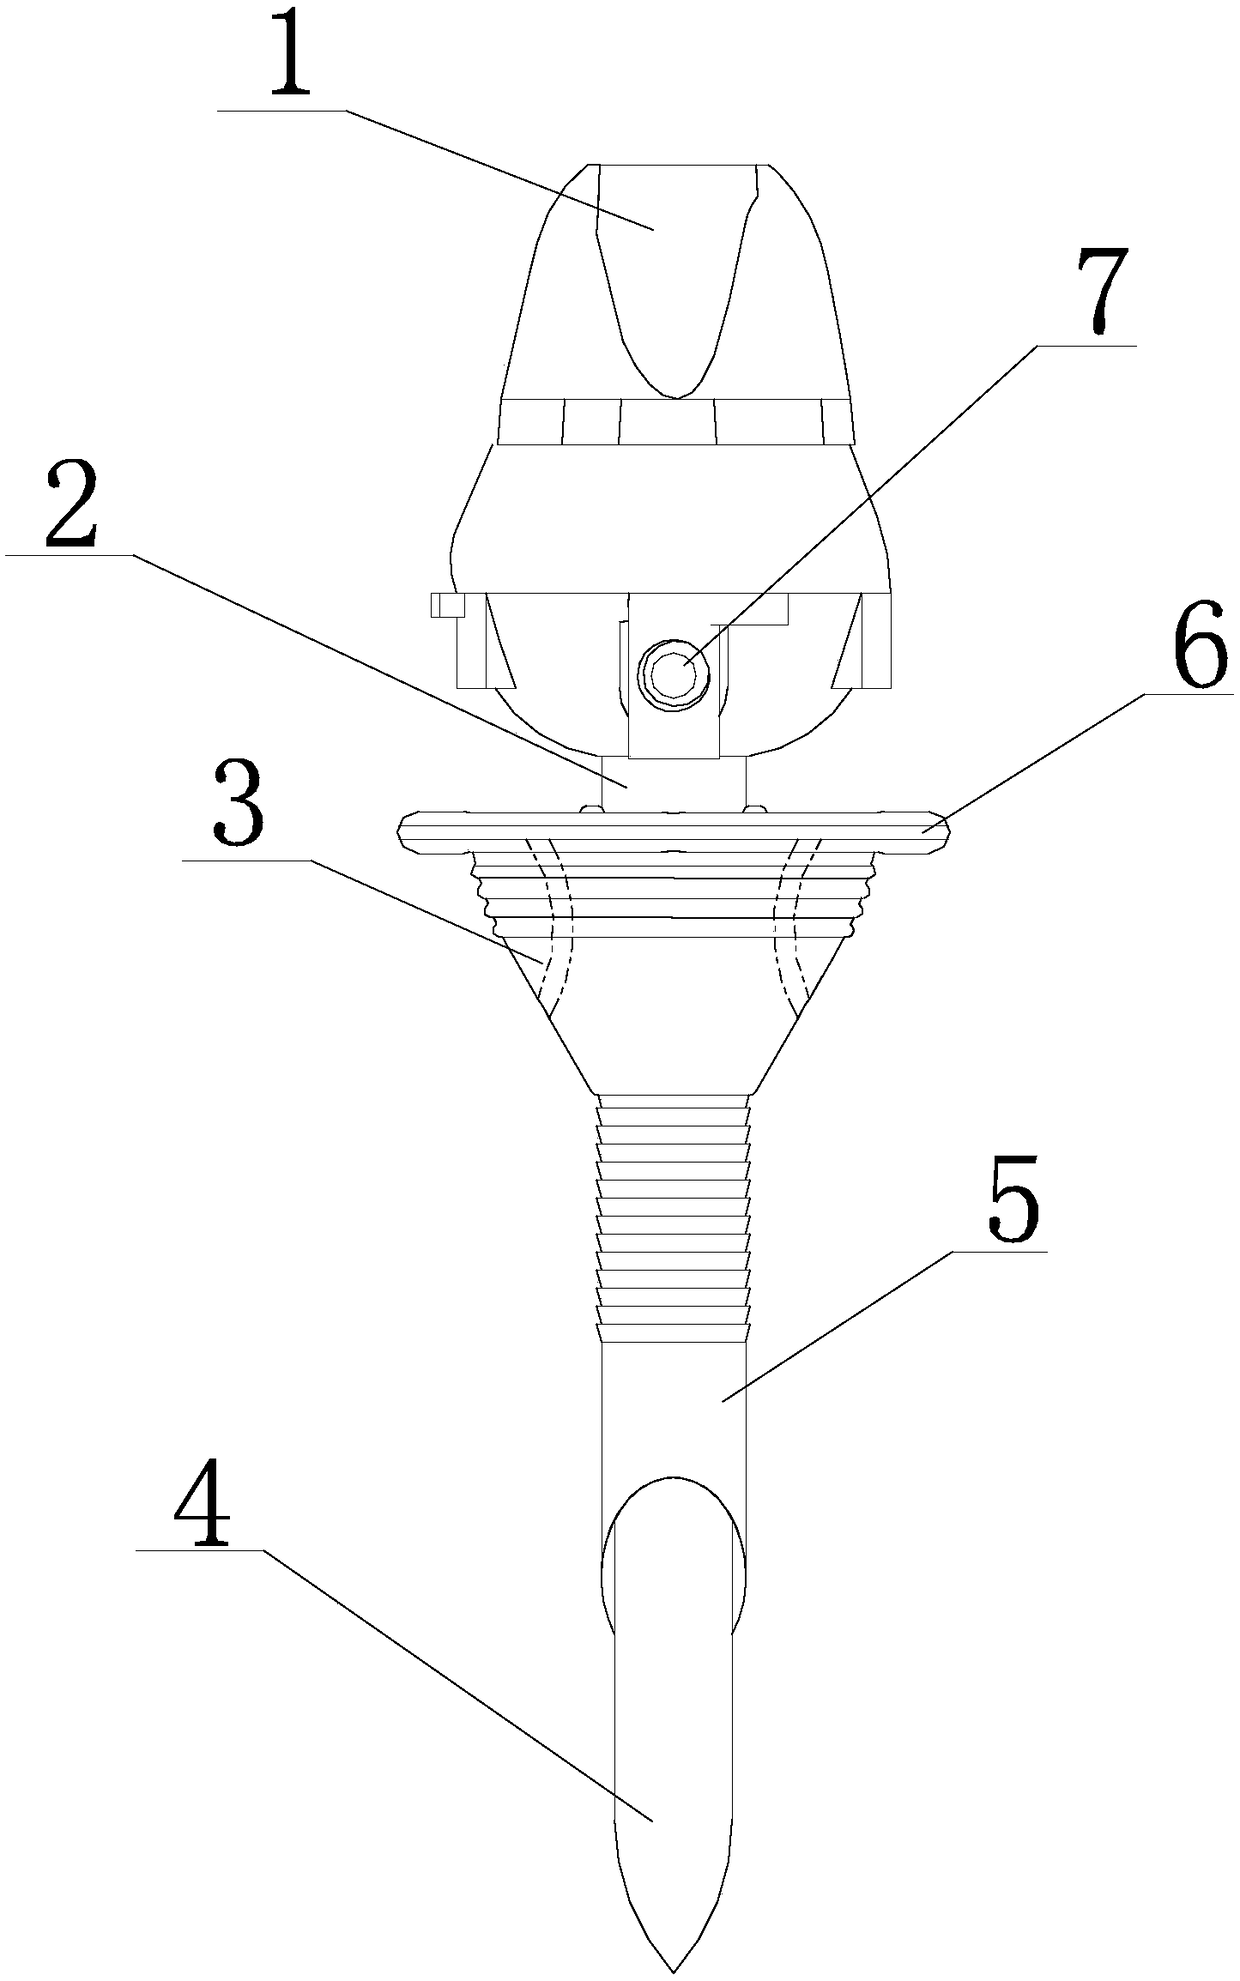 Endoscope puncture and suturing instrument